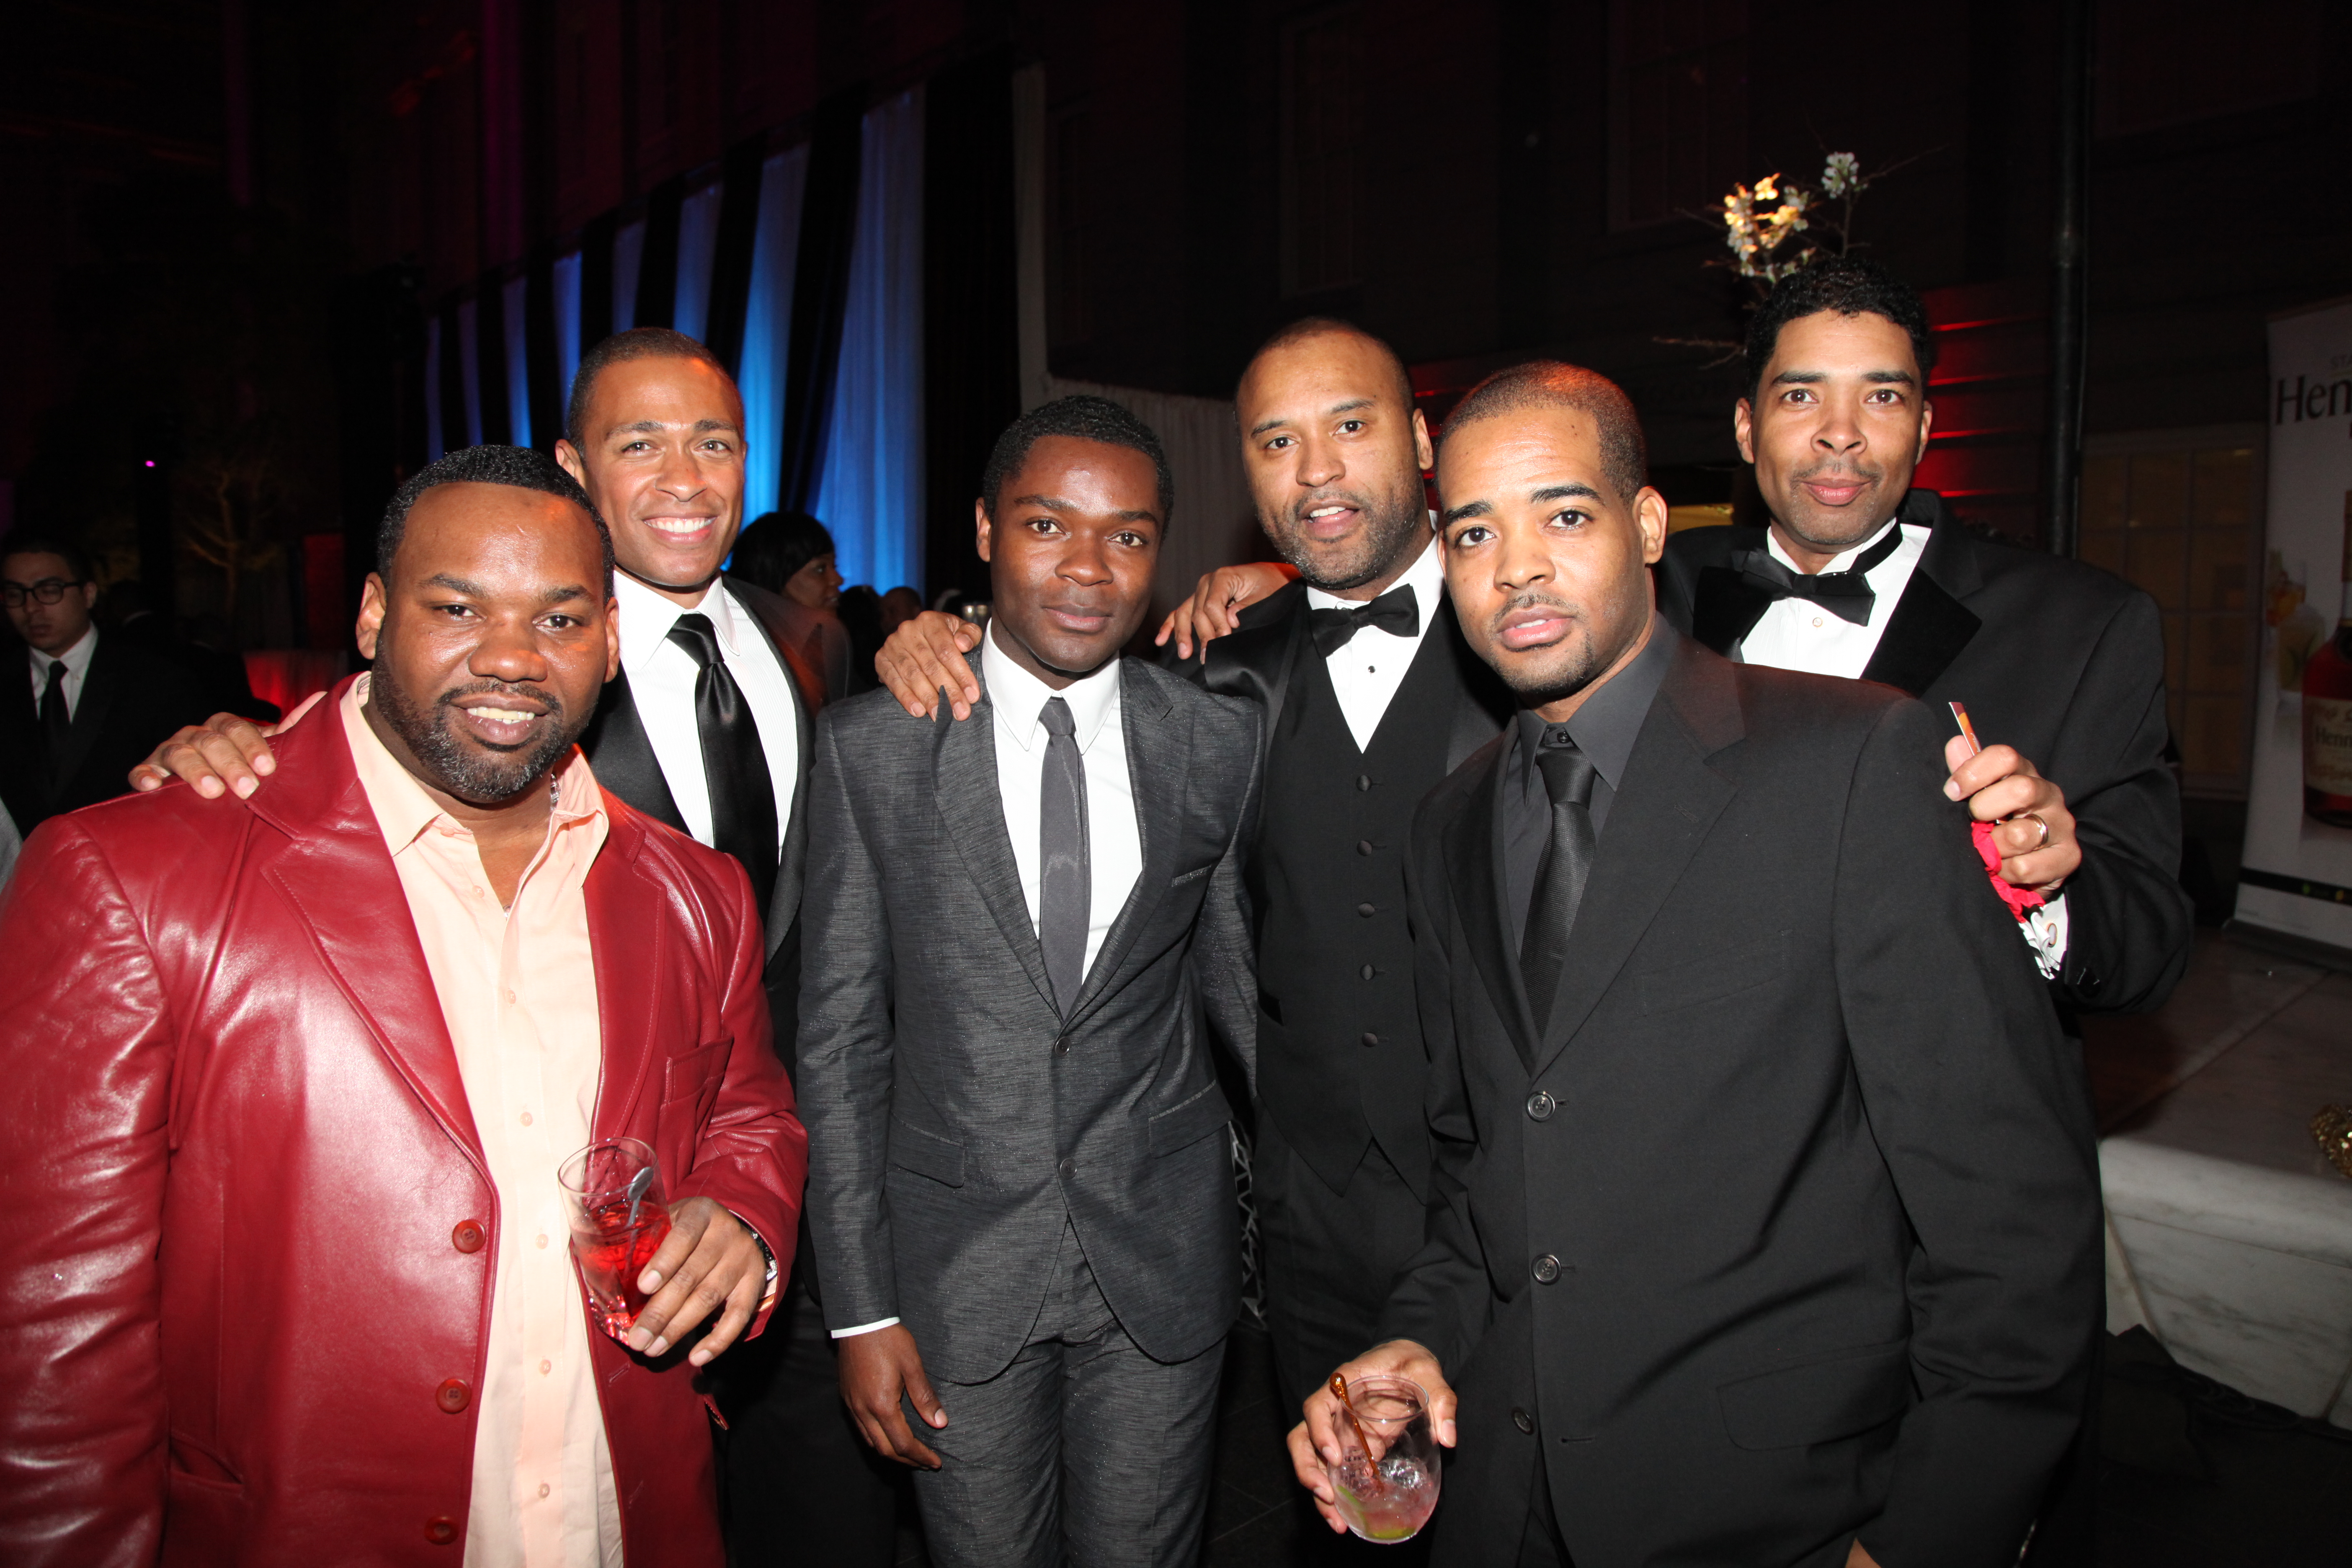 (L-R) Raekwon, TJ Holmes, David Oyelowo, Londell McMillan, Kirk Fraser, and Keith Clinkscales attend the after party for BET Honors 2012 at the Smithsonian American Art Museum & National Portrait Gallery on January 14, 2012 in Washington, DC.